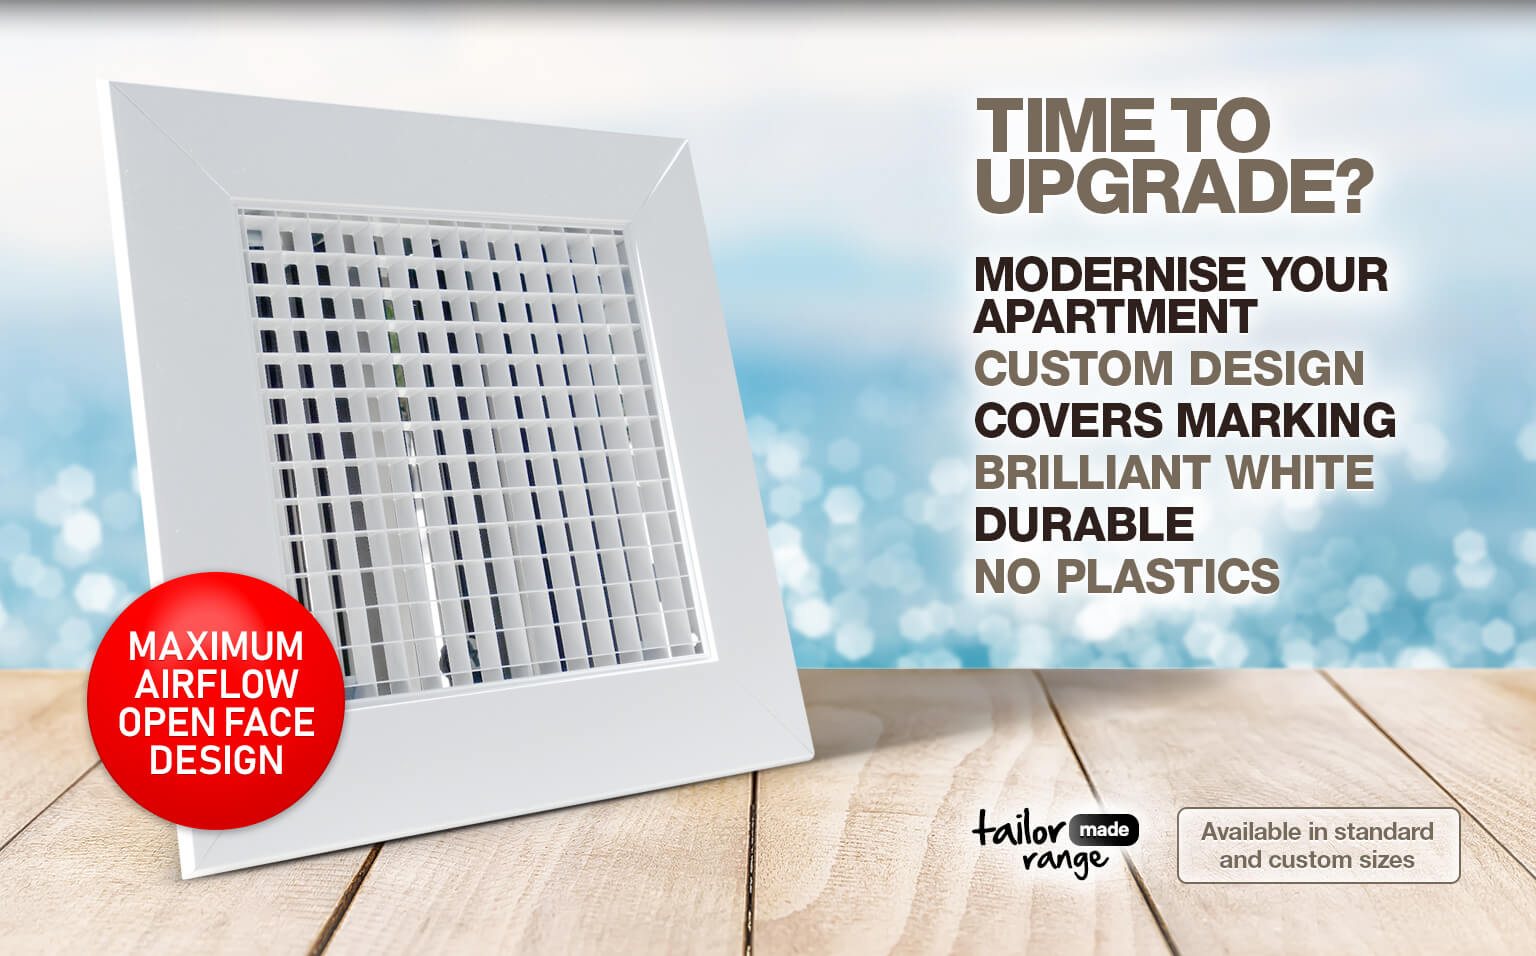 Buy new or replacement apartment air registers and vents from SafeAir